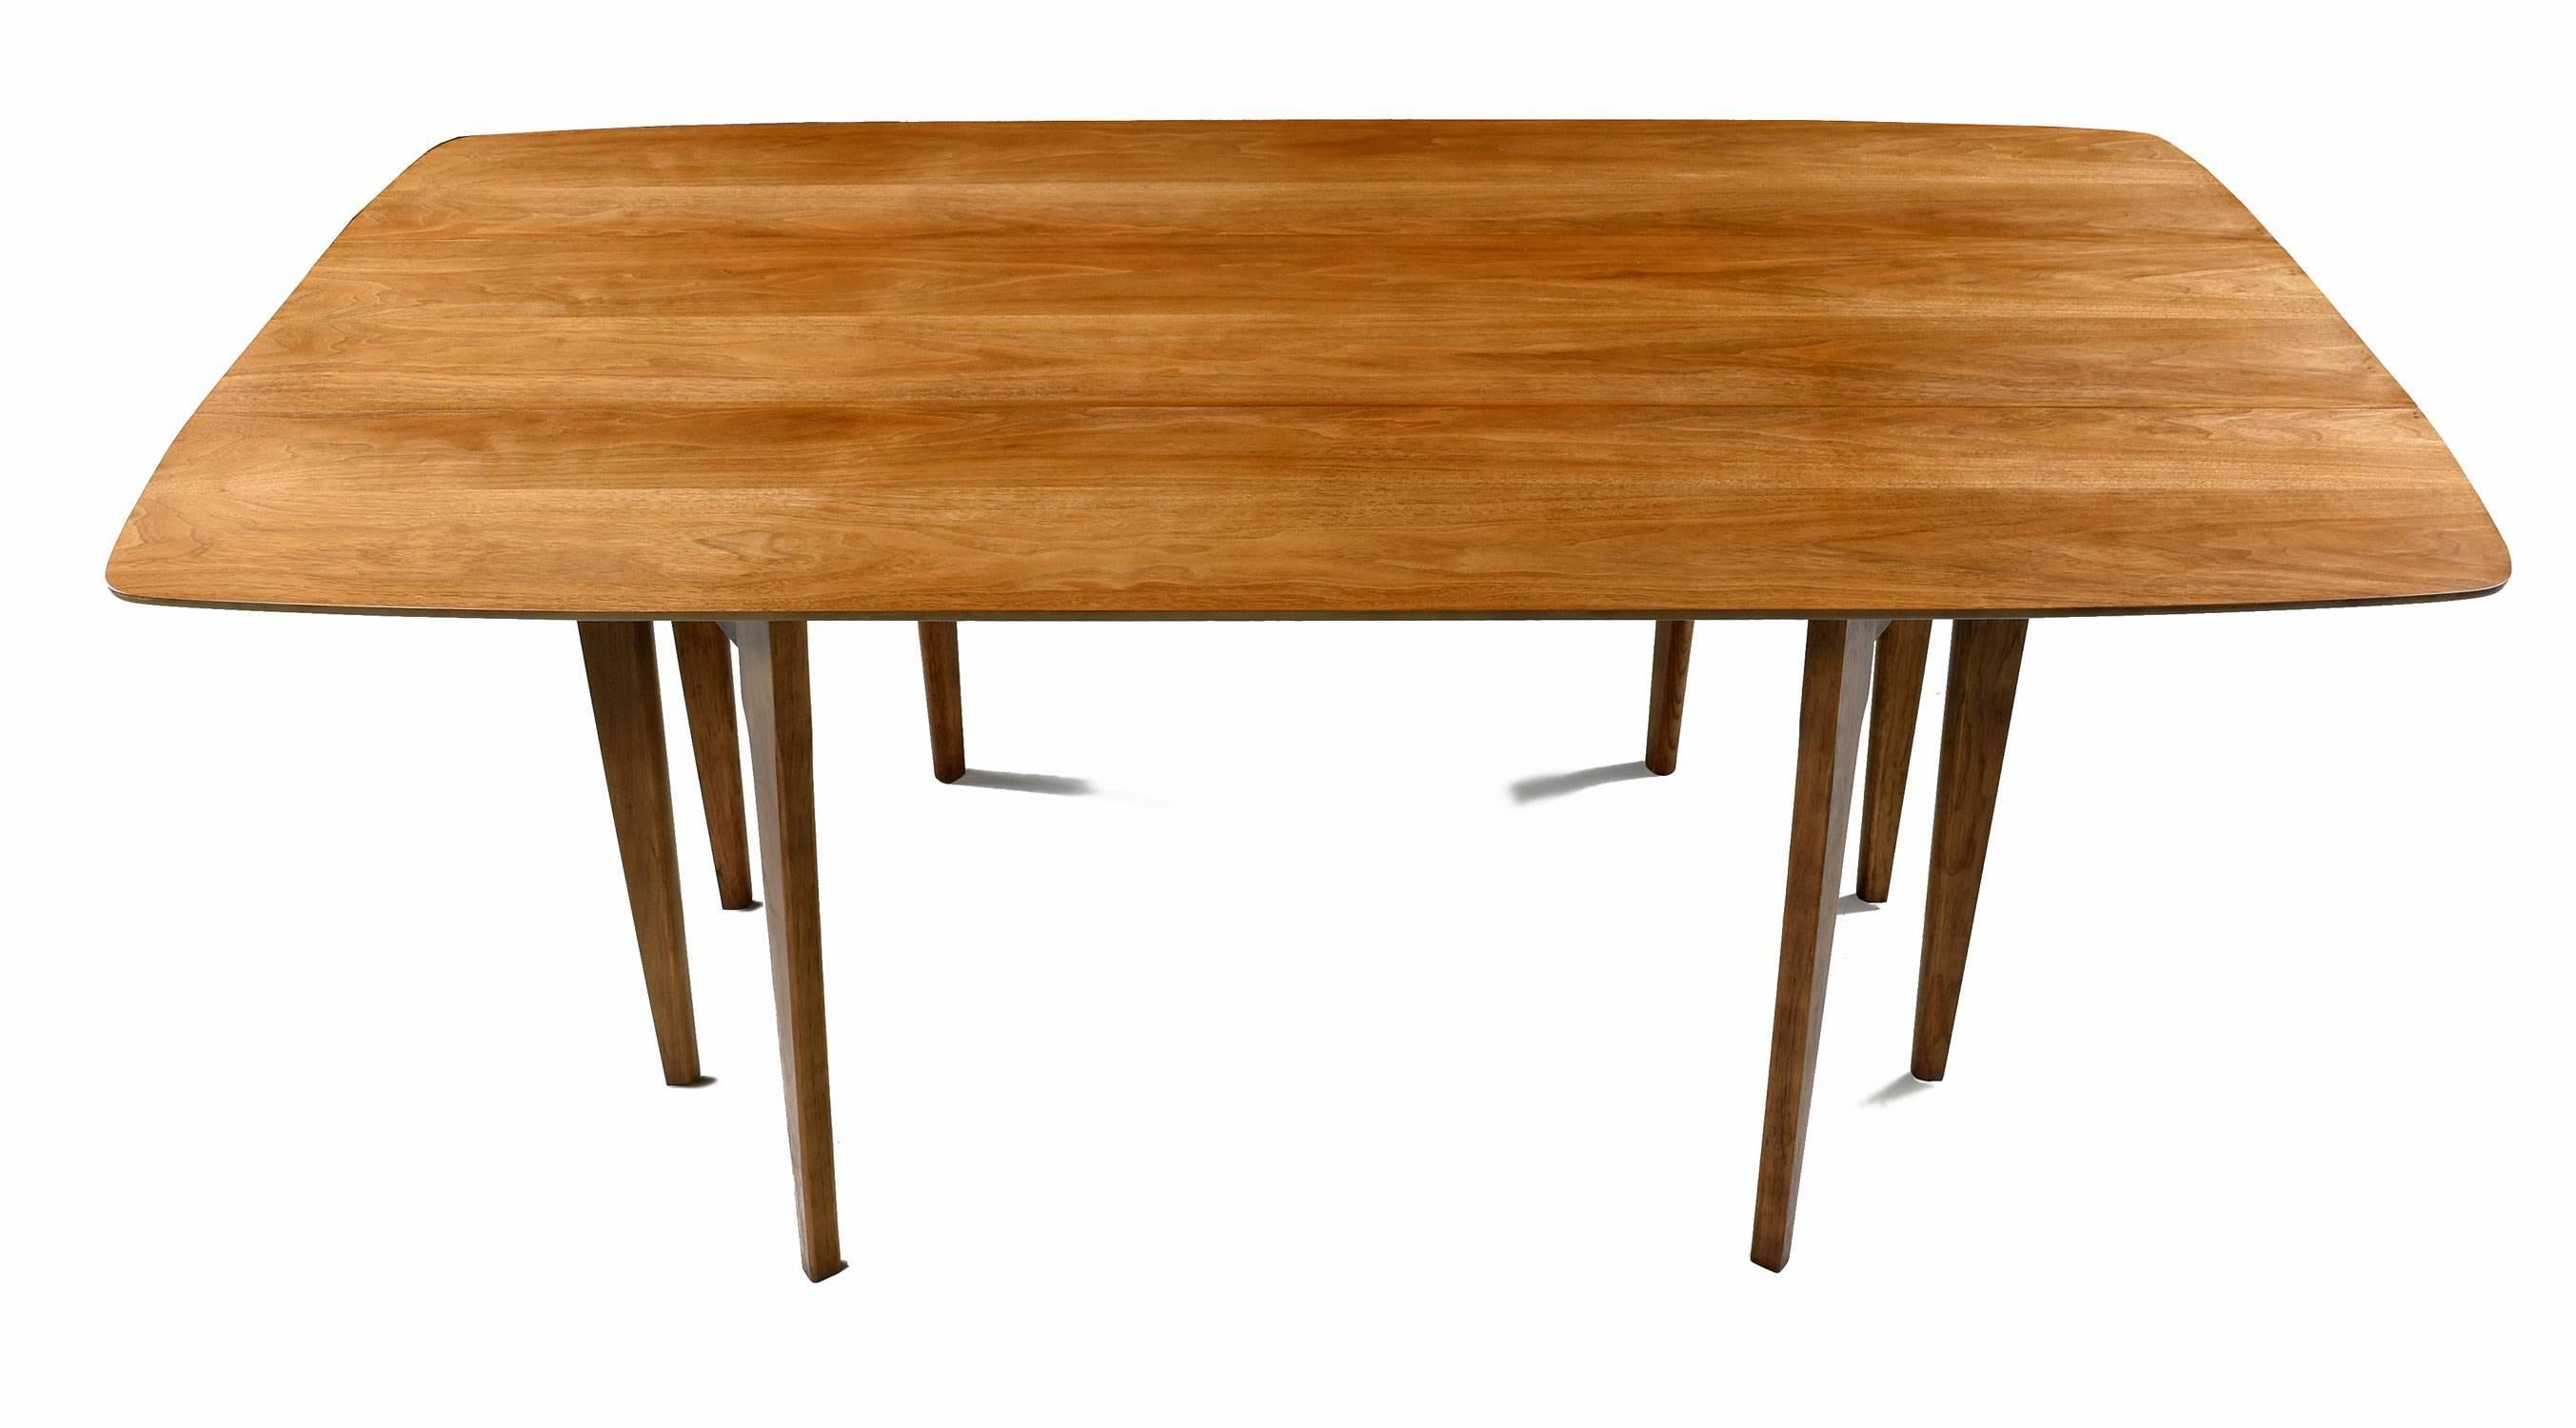 Restored Mid-Century Modern walnut Drexel K43 table, made in the 1960s. This is a multifunctional piece that can serve as a dining table and/or sofa table. Used as a dining table, one can seat six guests. If you are short on space fold down one or